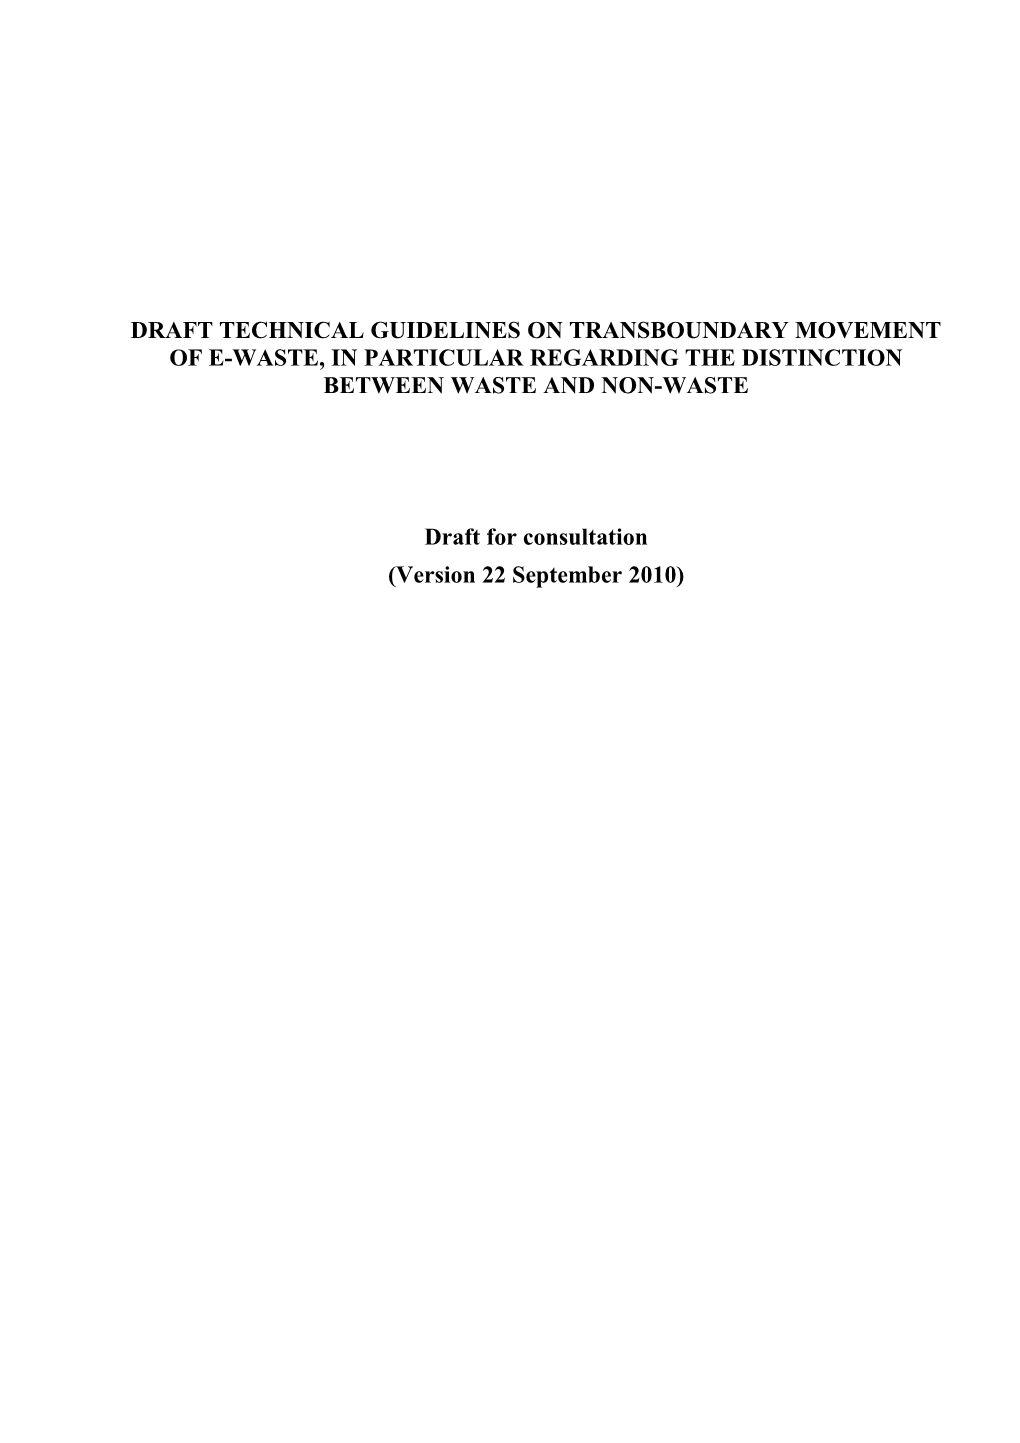 Guidelines on Transboudary Movement of E-Waste, in Particular Regarding the Distinction